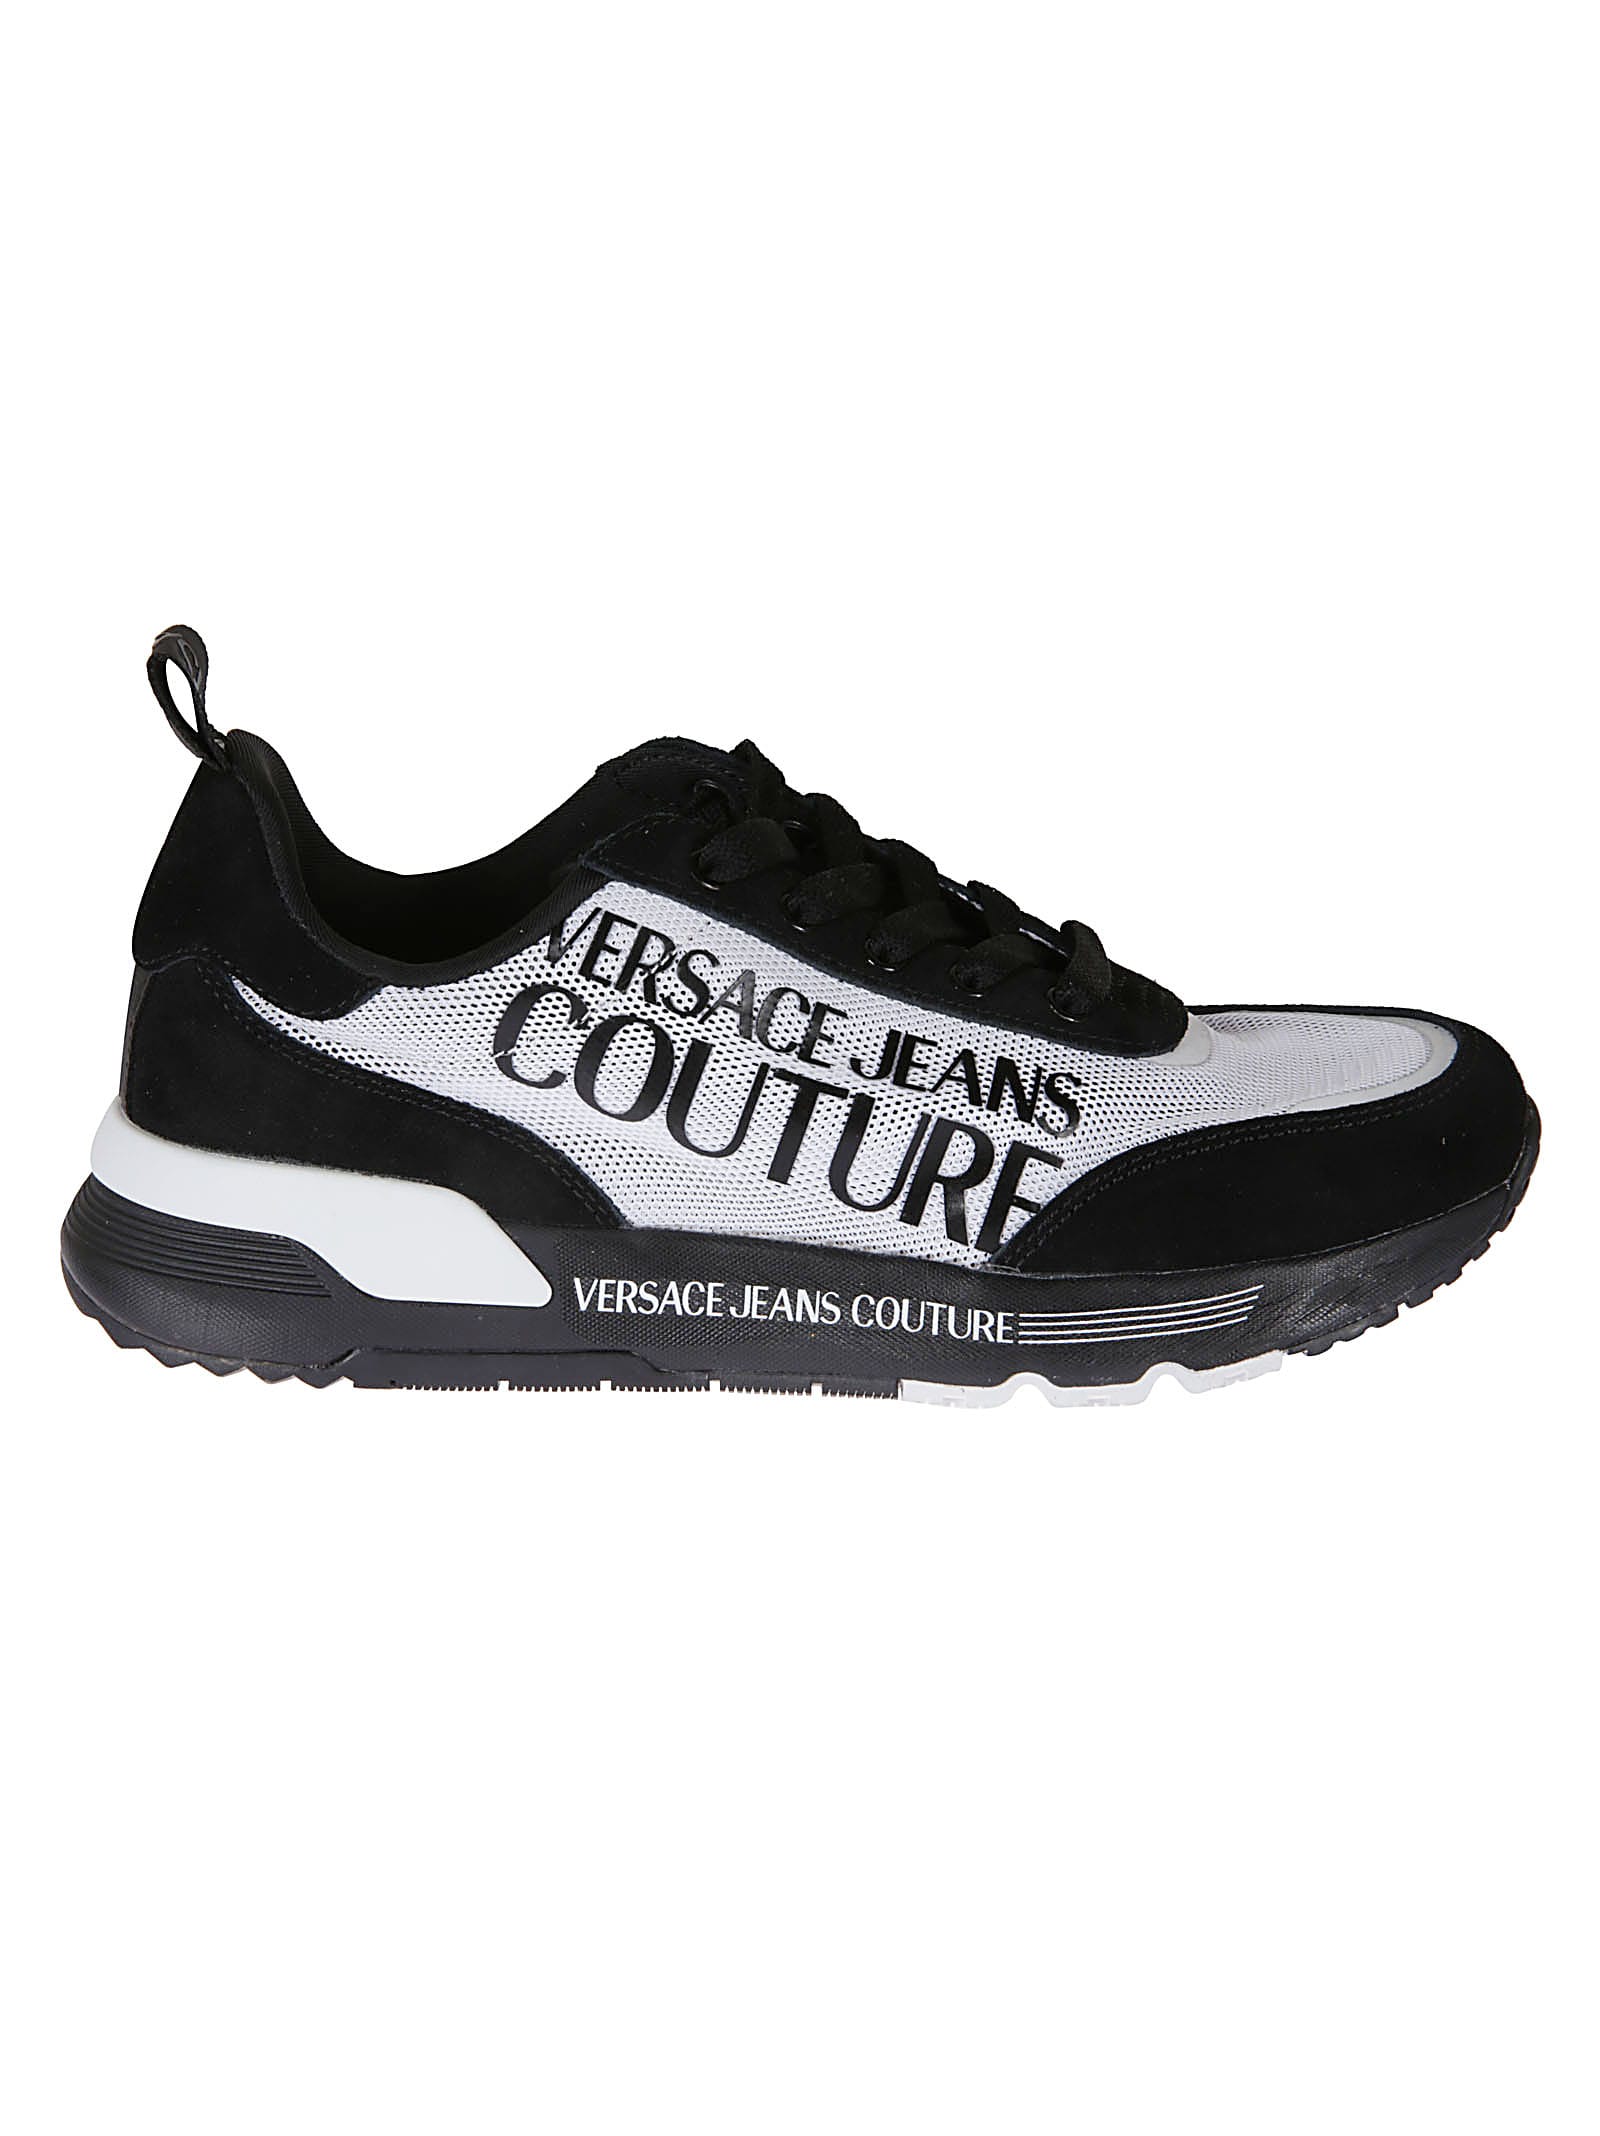 Versace Jeans Couture Dynamic Couture Logo Sneakers